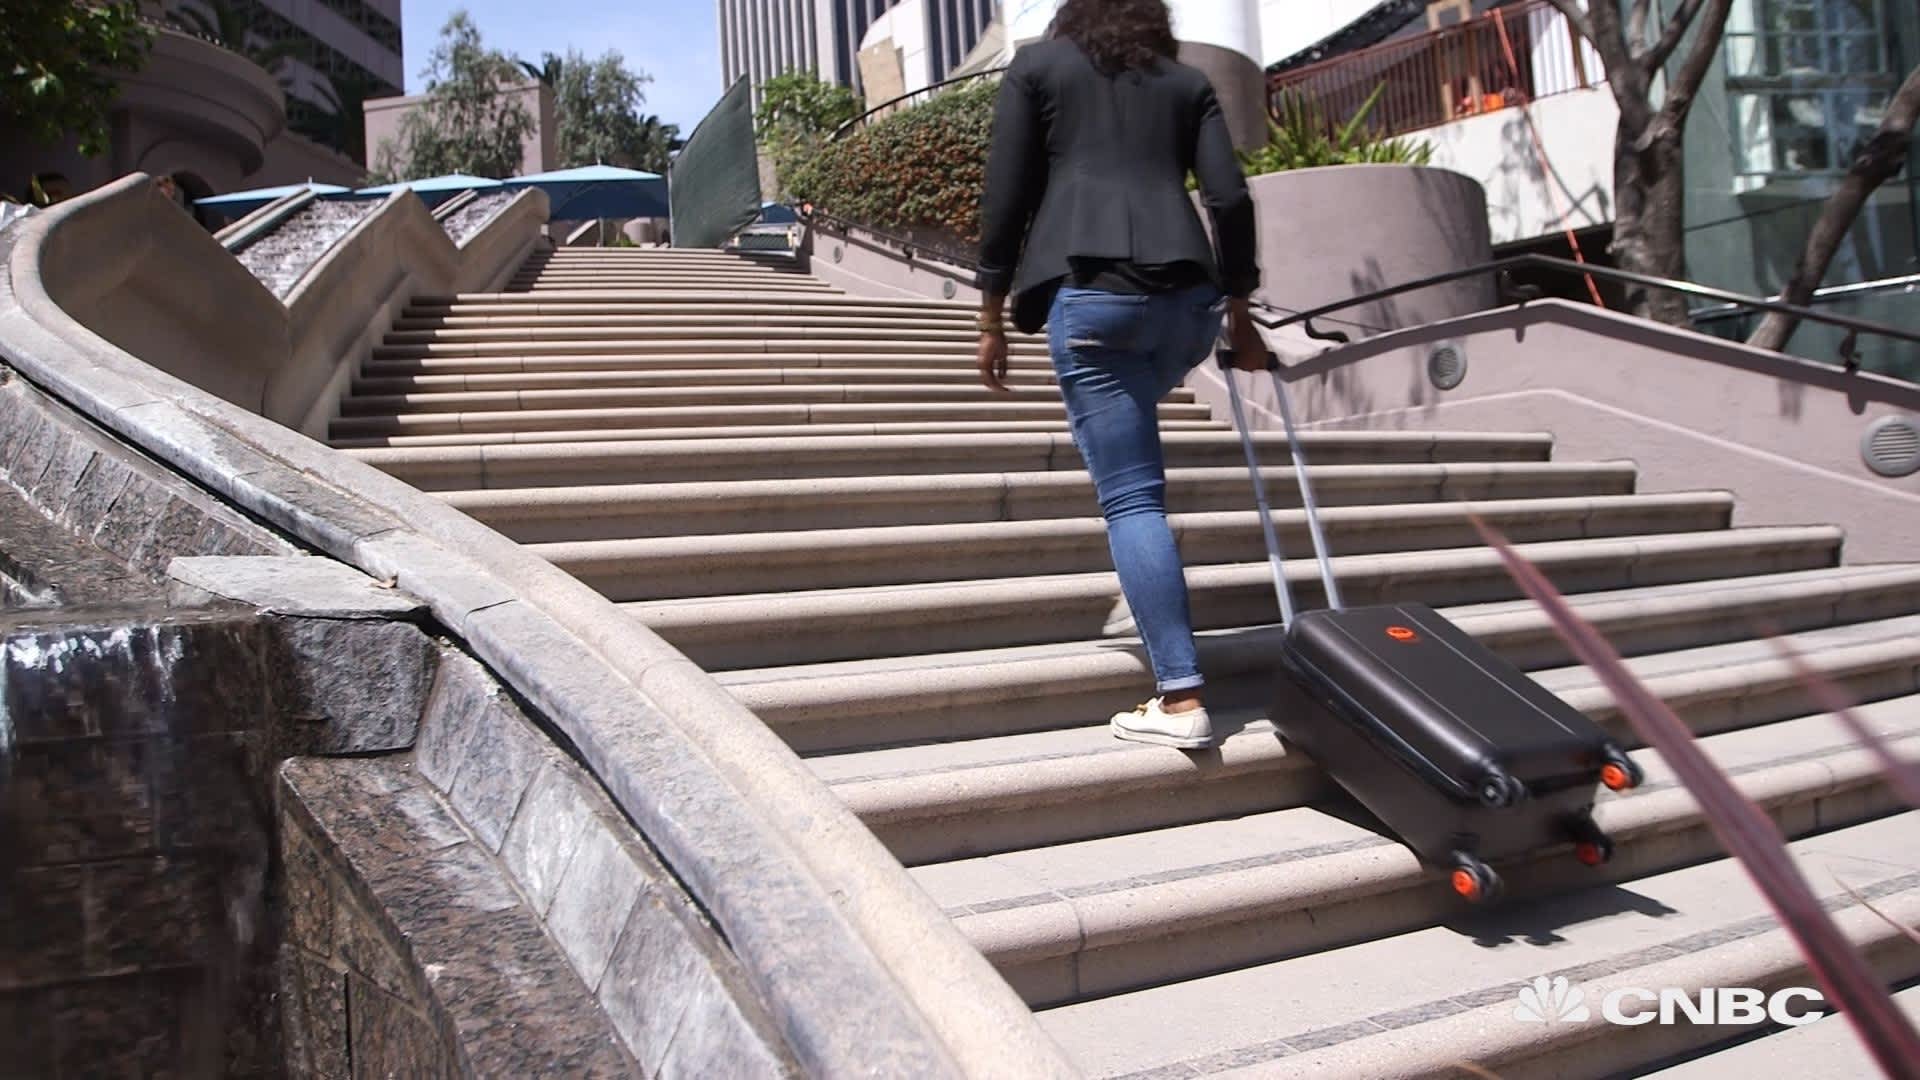 This smart suitcase traverses stairs like a tank